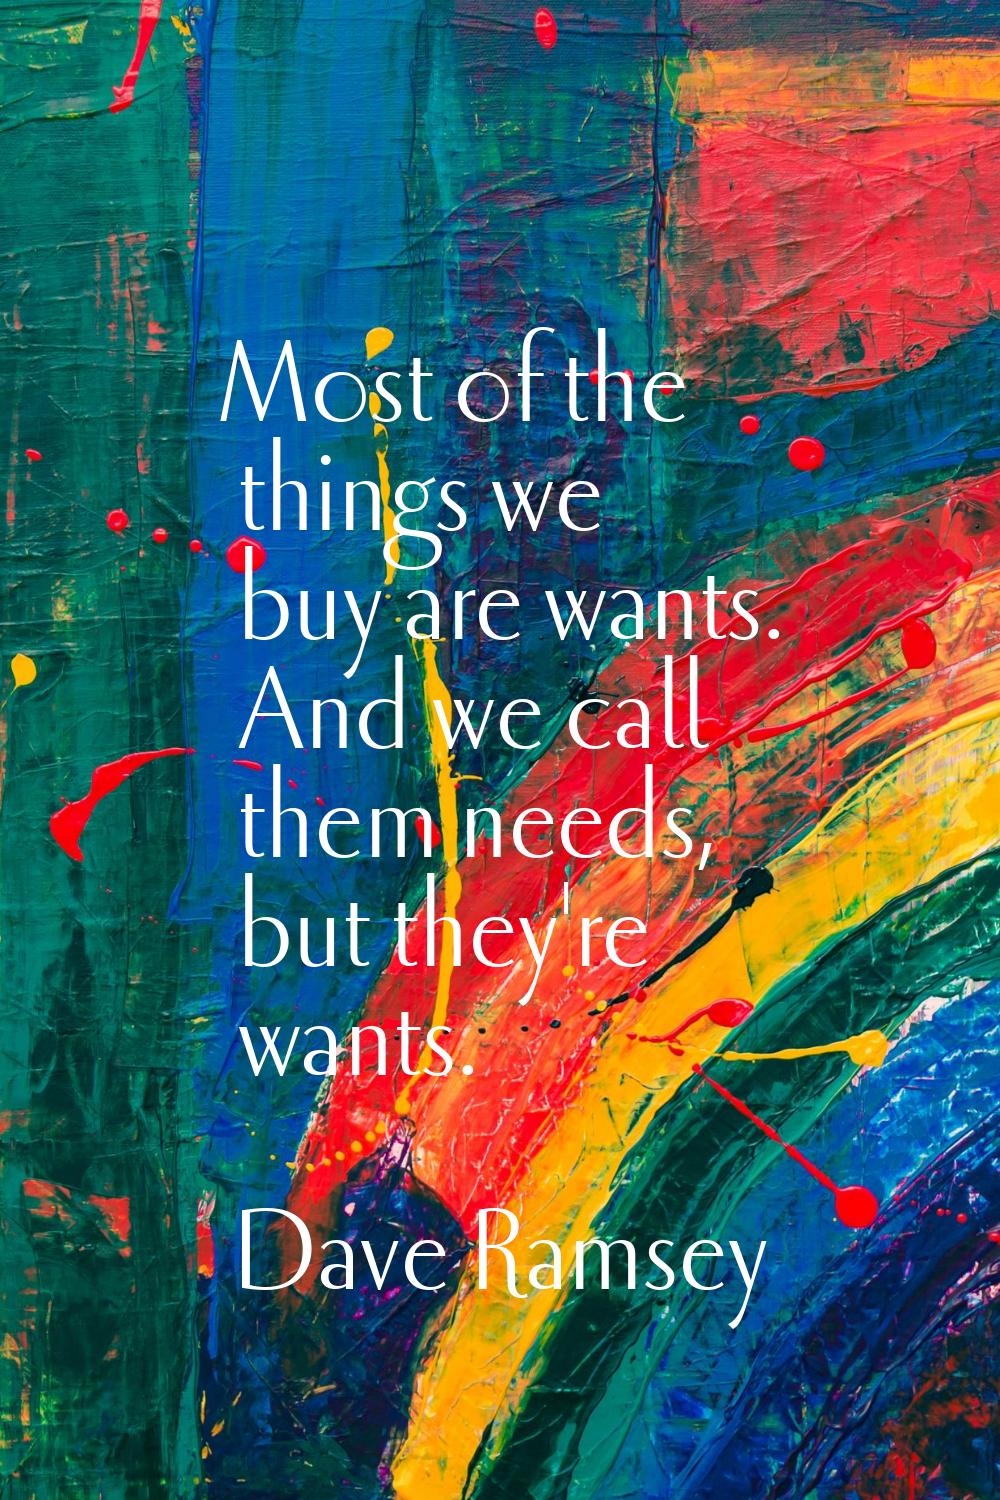 Most of the things we buy are wants. And we call them needs, but they're wants.